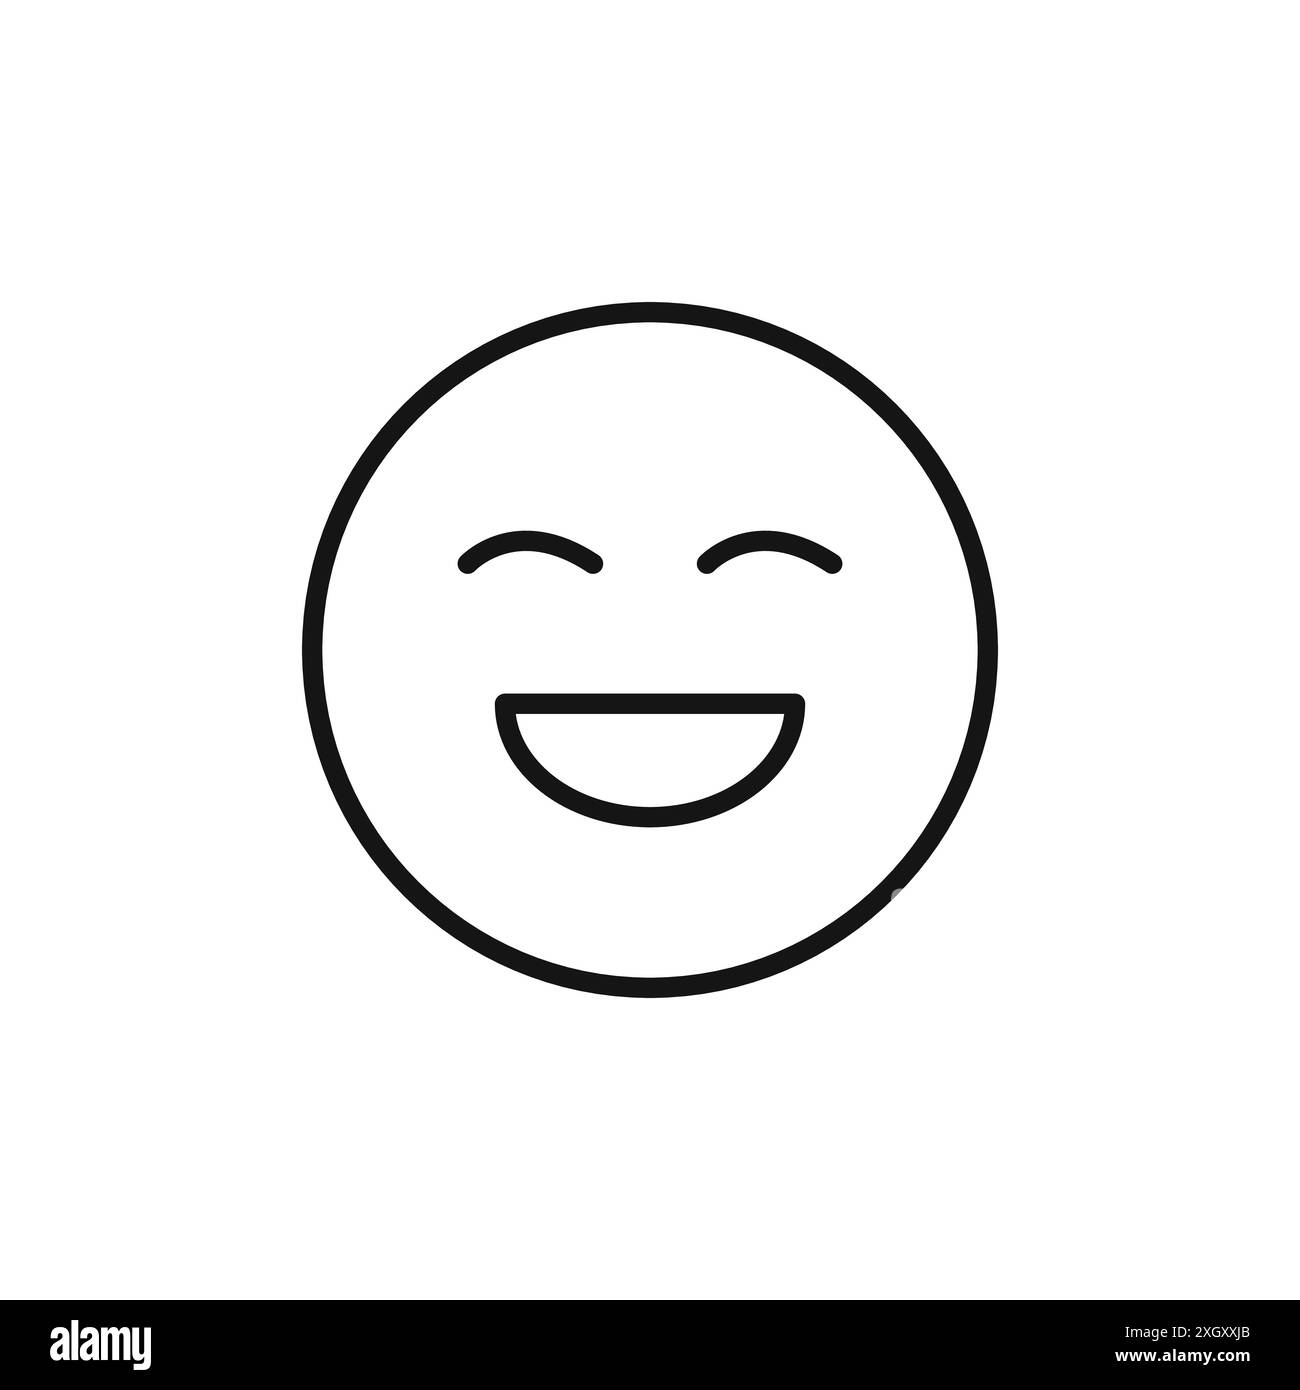 Smile icon logo sign vector outline in black and white color Stock Vector